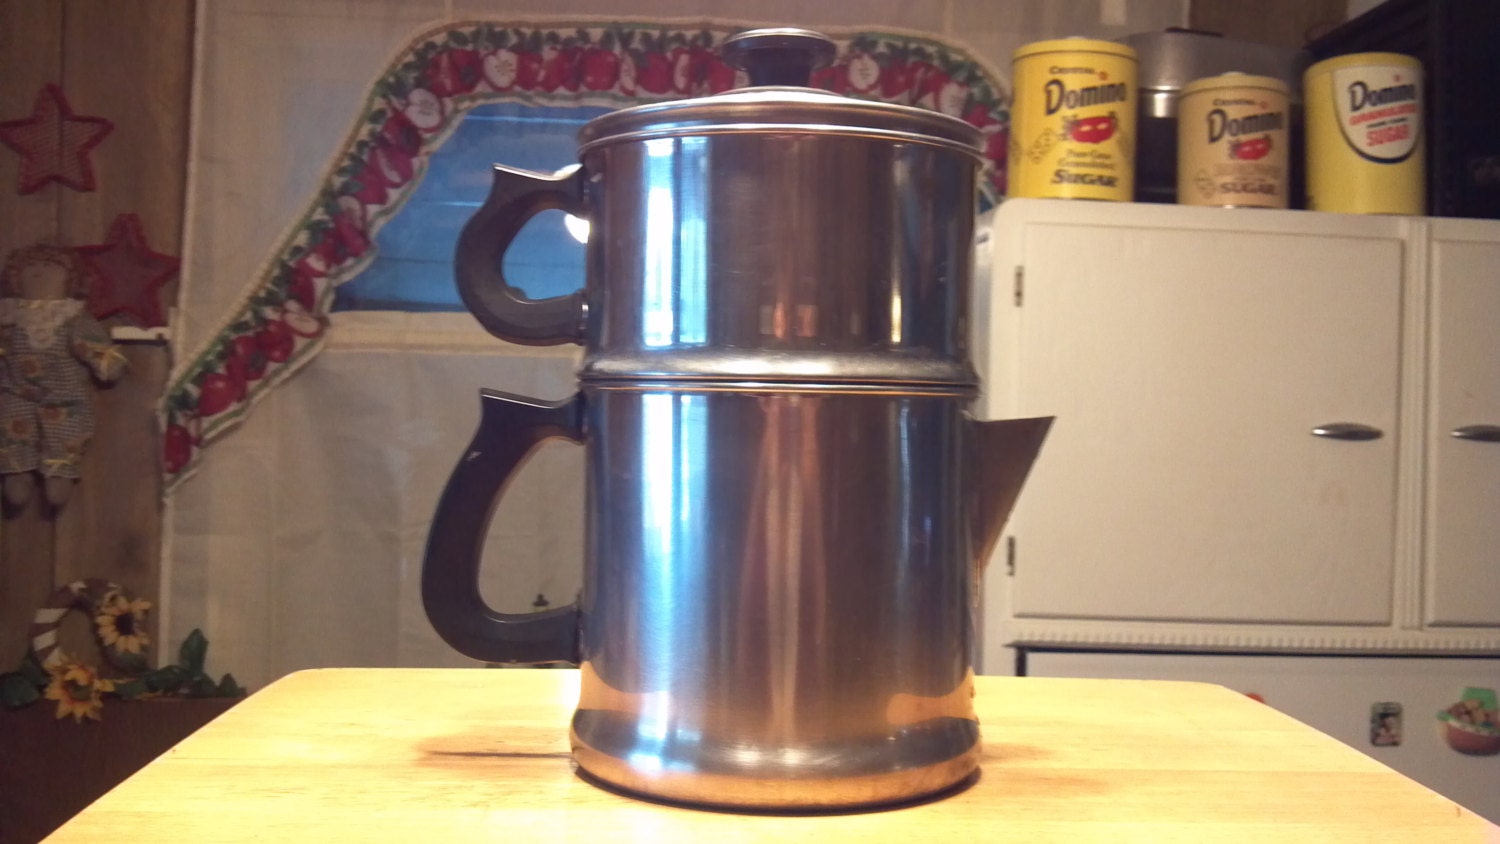 VINTAGE LIFETIME #T304 Made IN USA 4 QT STAINLESS STEEL TEA KETTLE